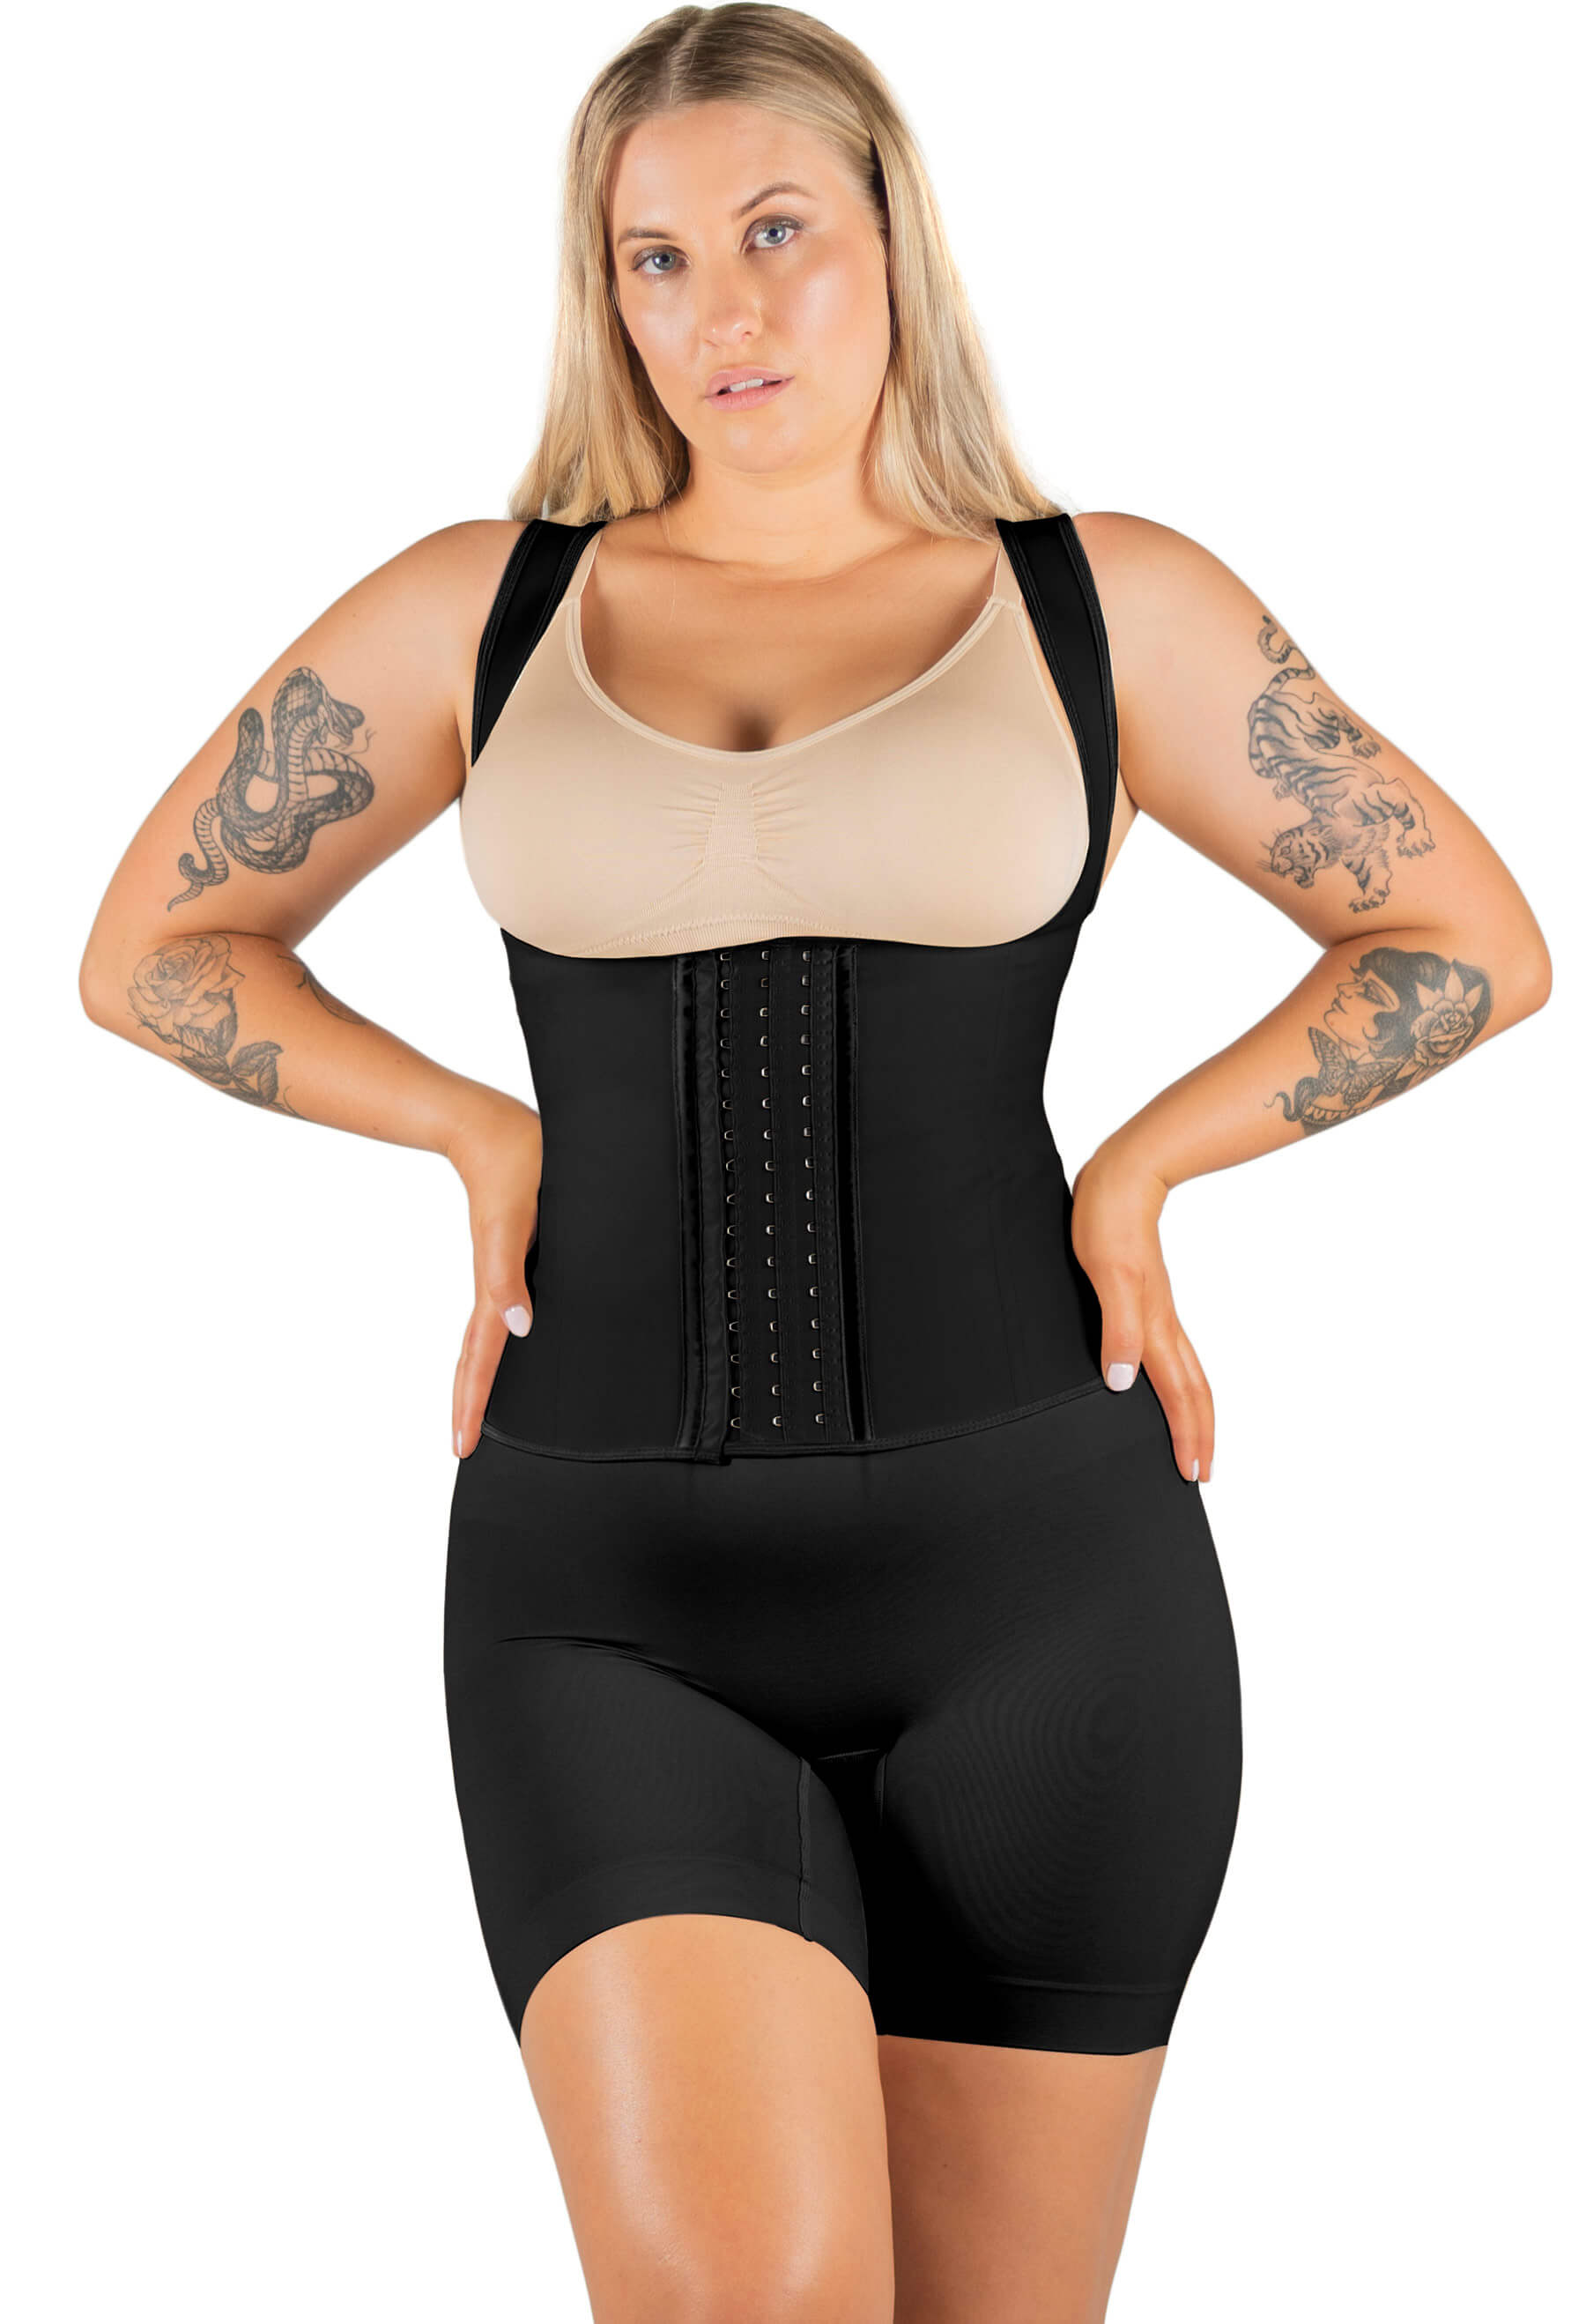 Shaping up in Geelong, Colac and Warrnambool with Shapewear from